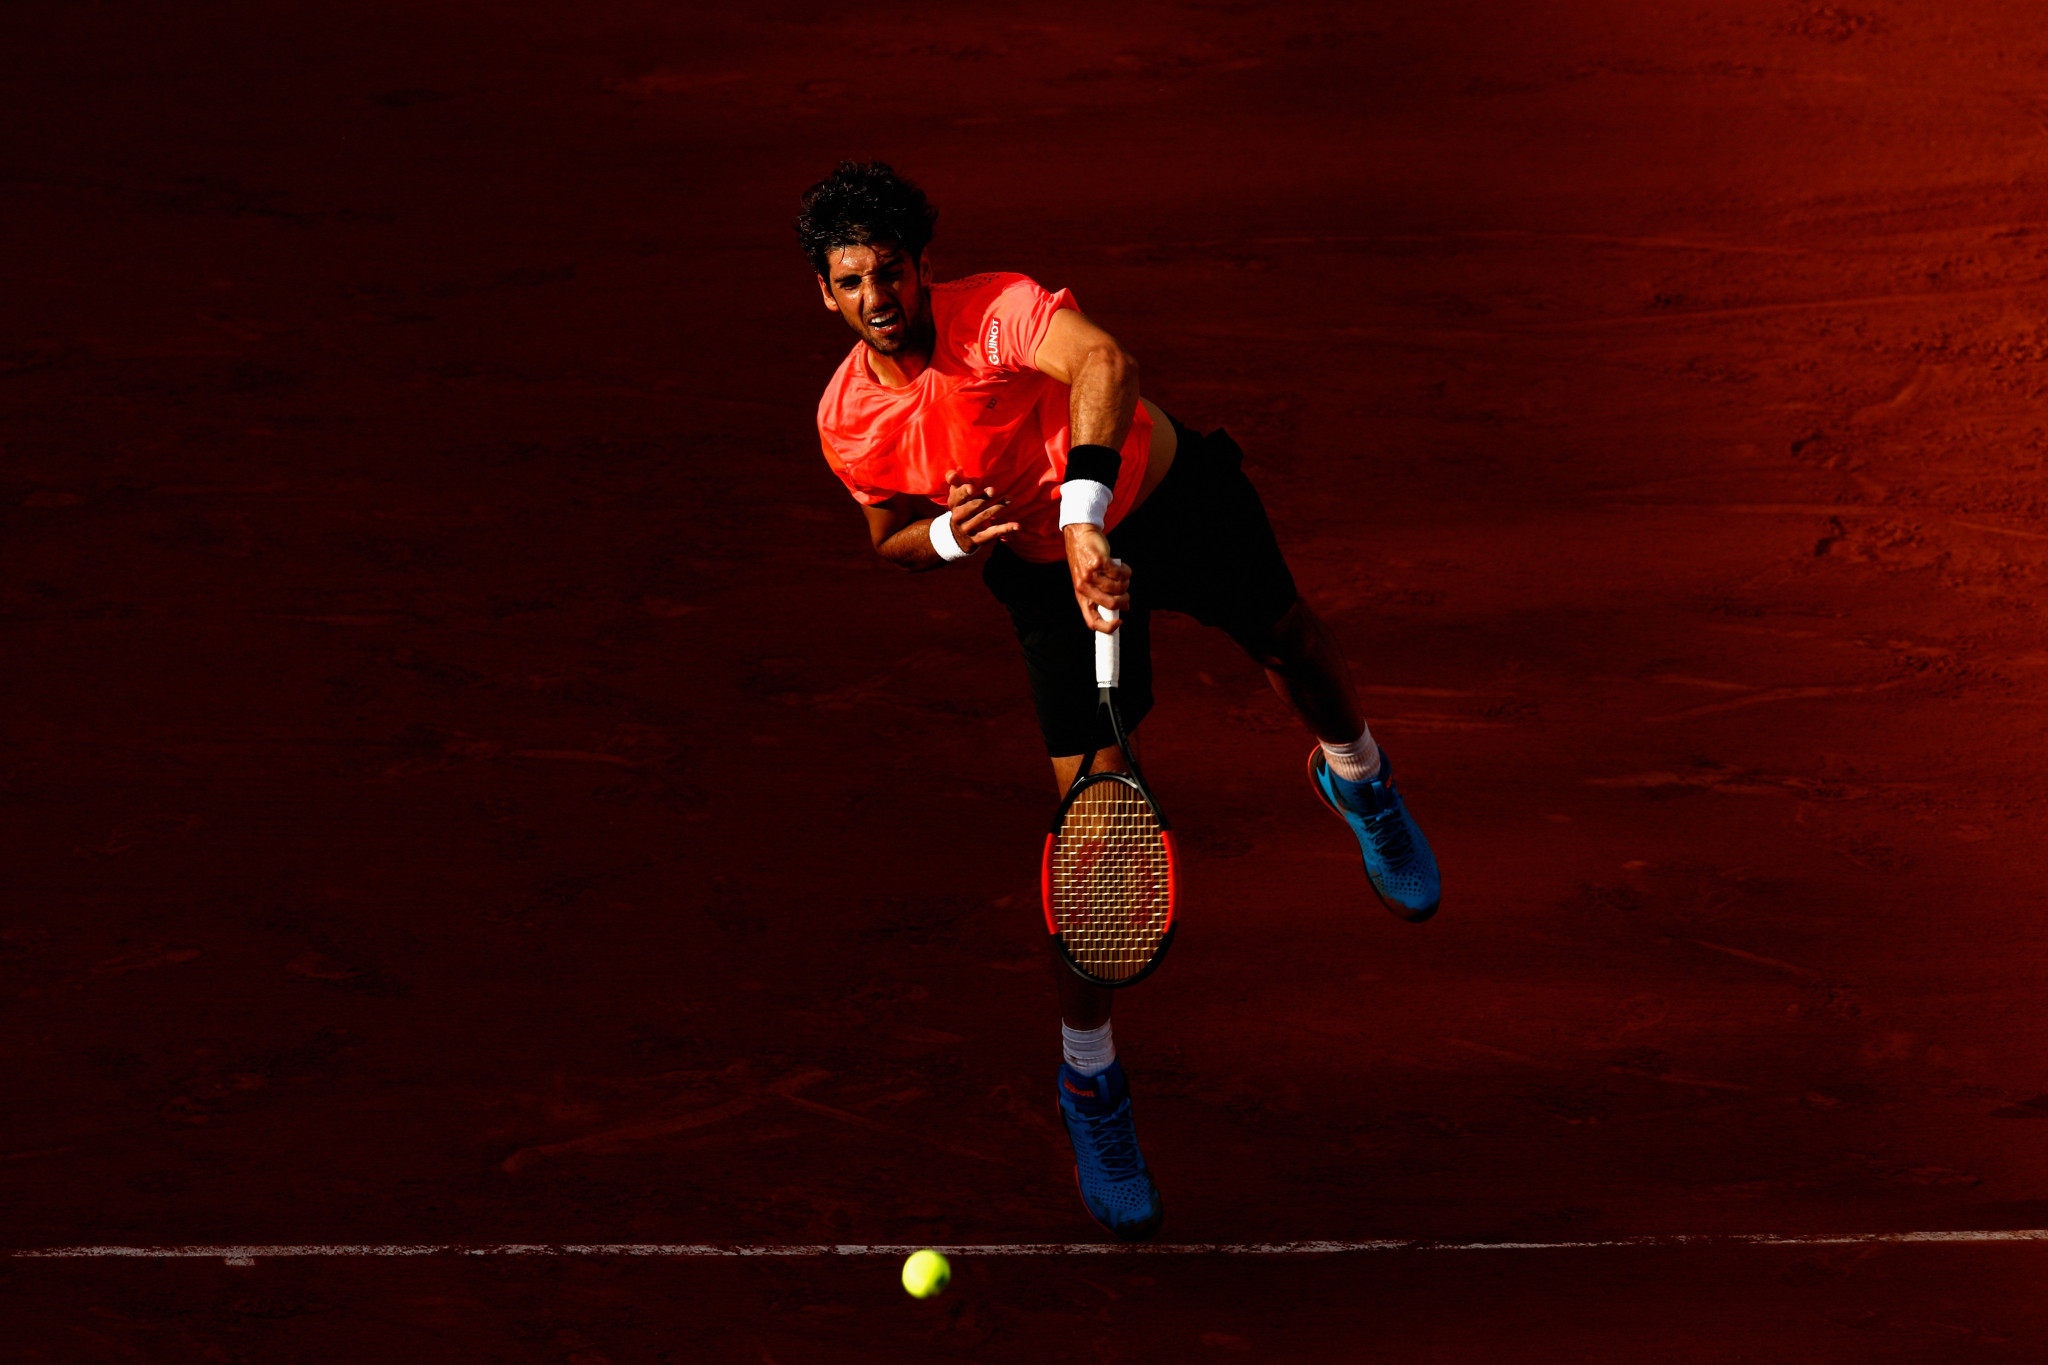 Thomaz Bellucci can play again from February 1 ©Getty Images